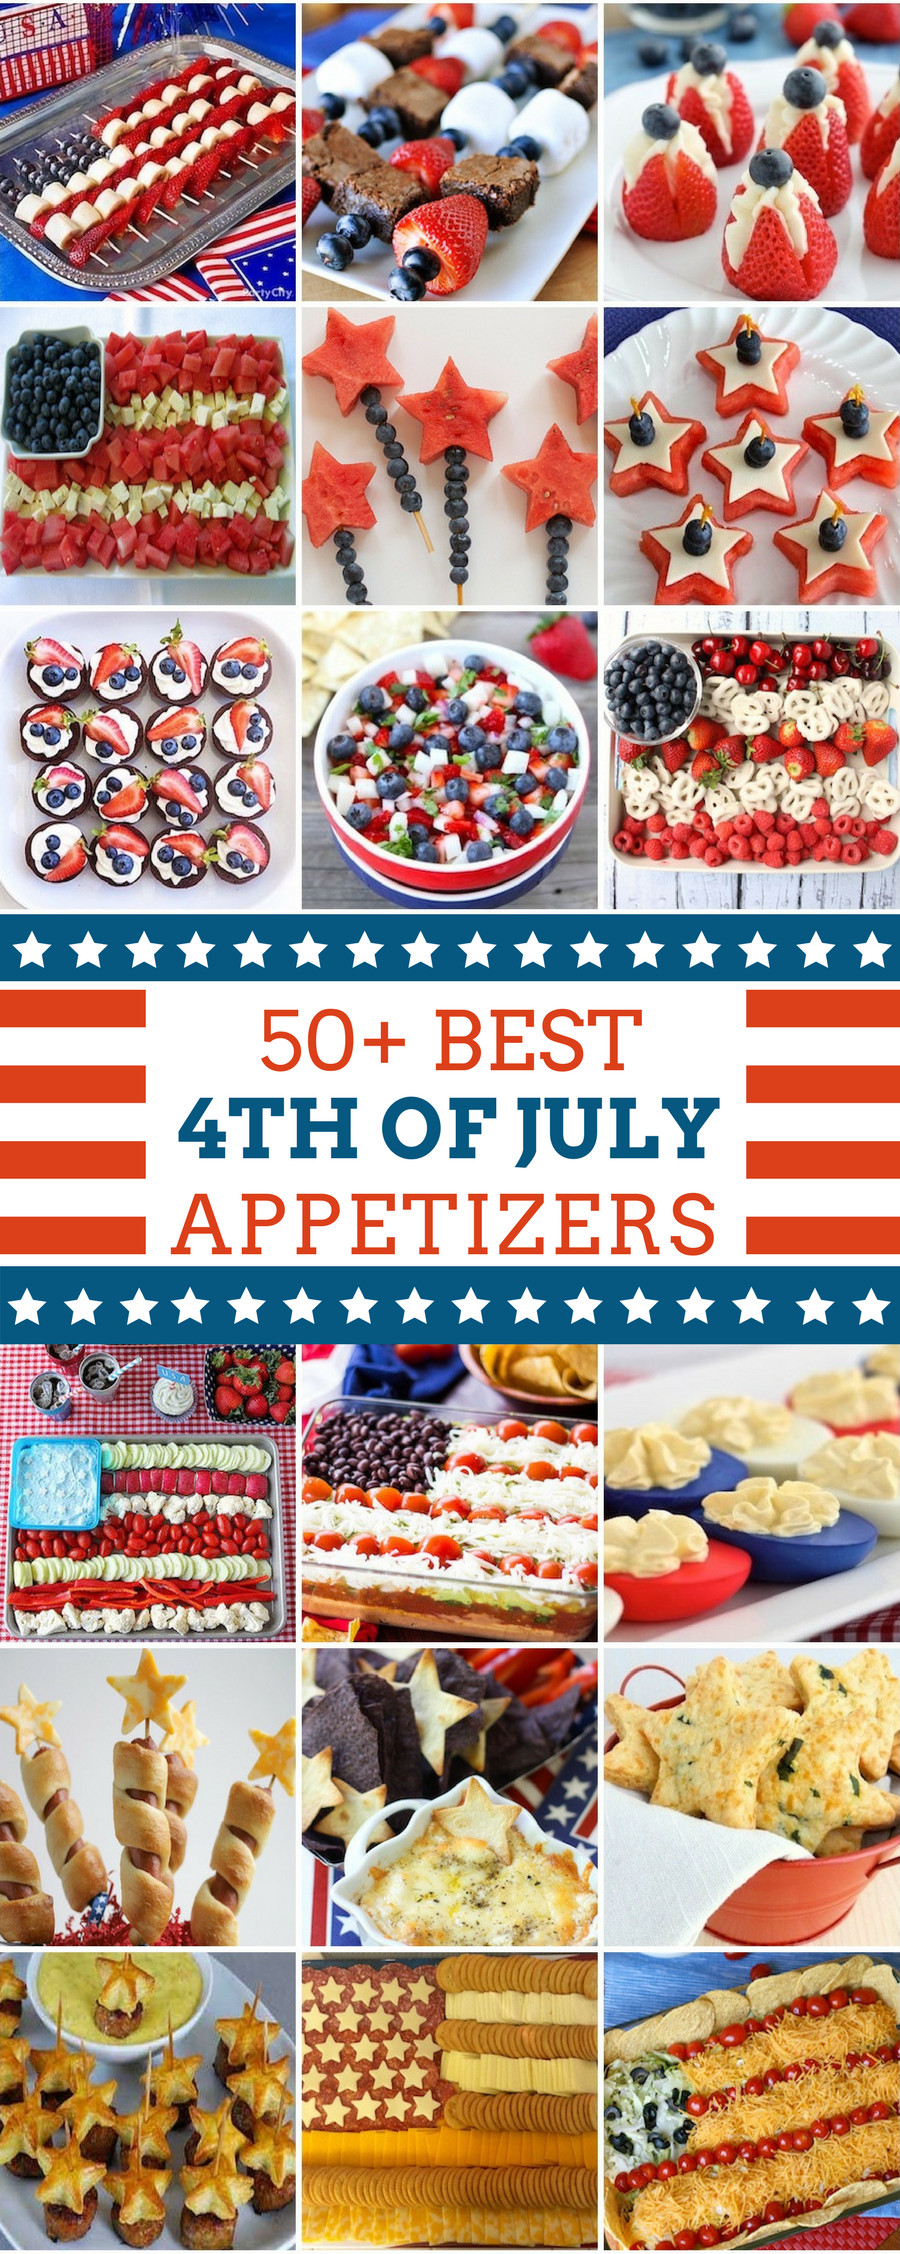 4Th Of July Appetizers
 50 Best 4th of July Appetizers Prudent Penny Pincher